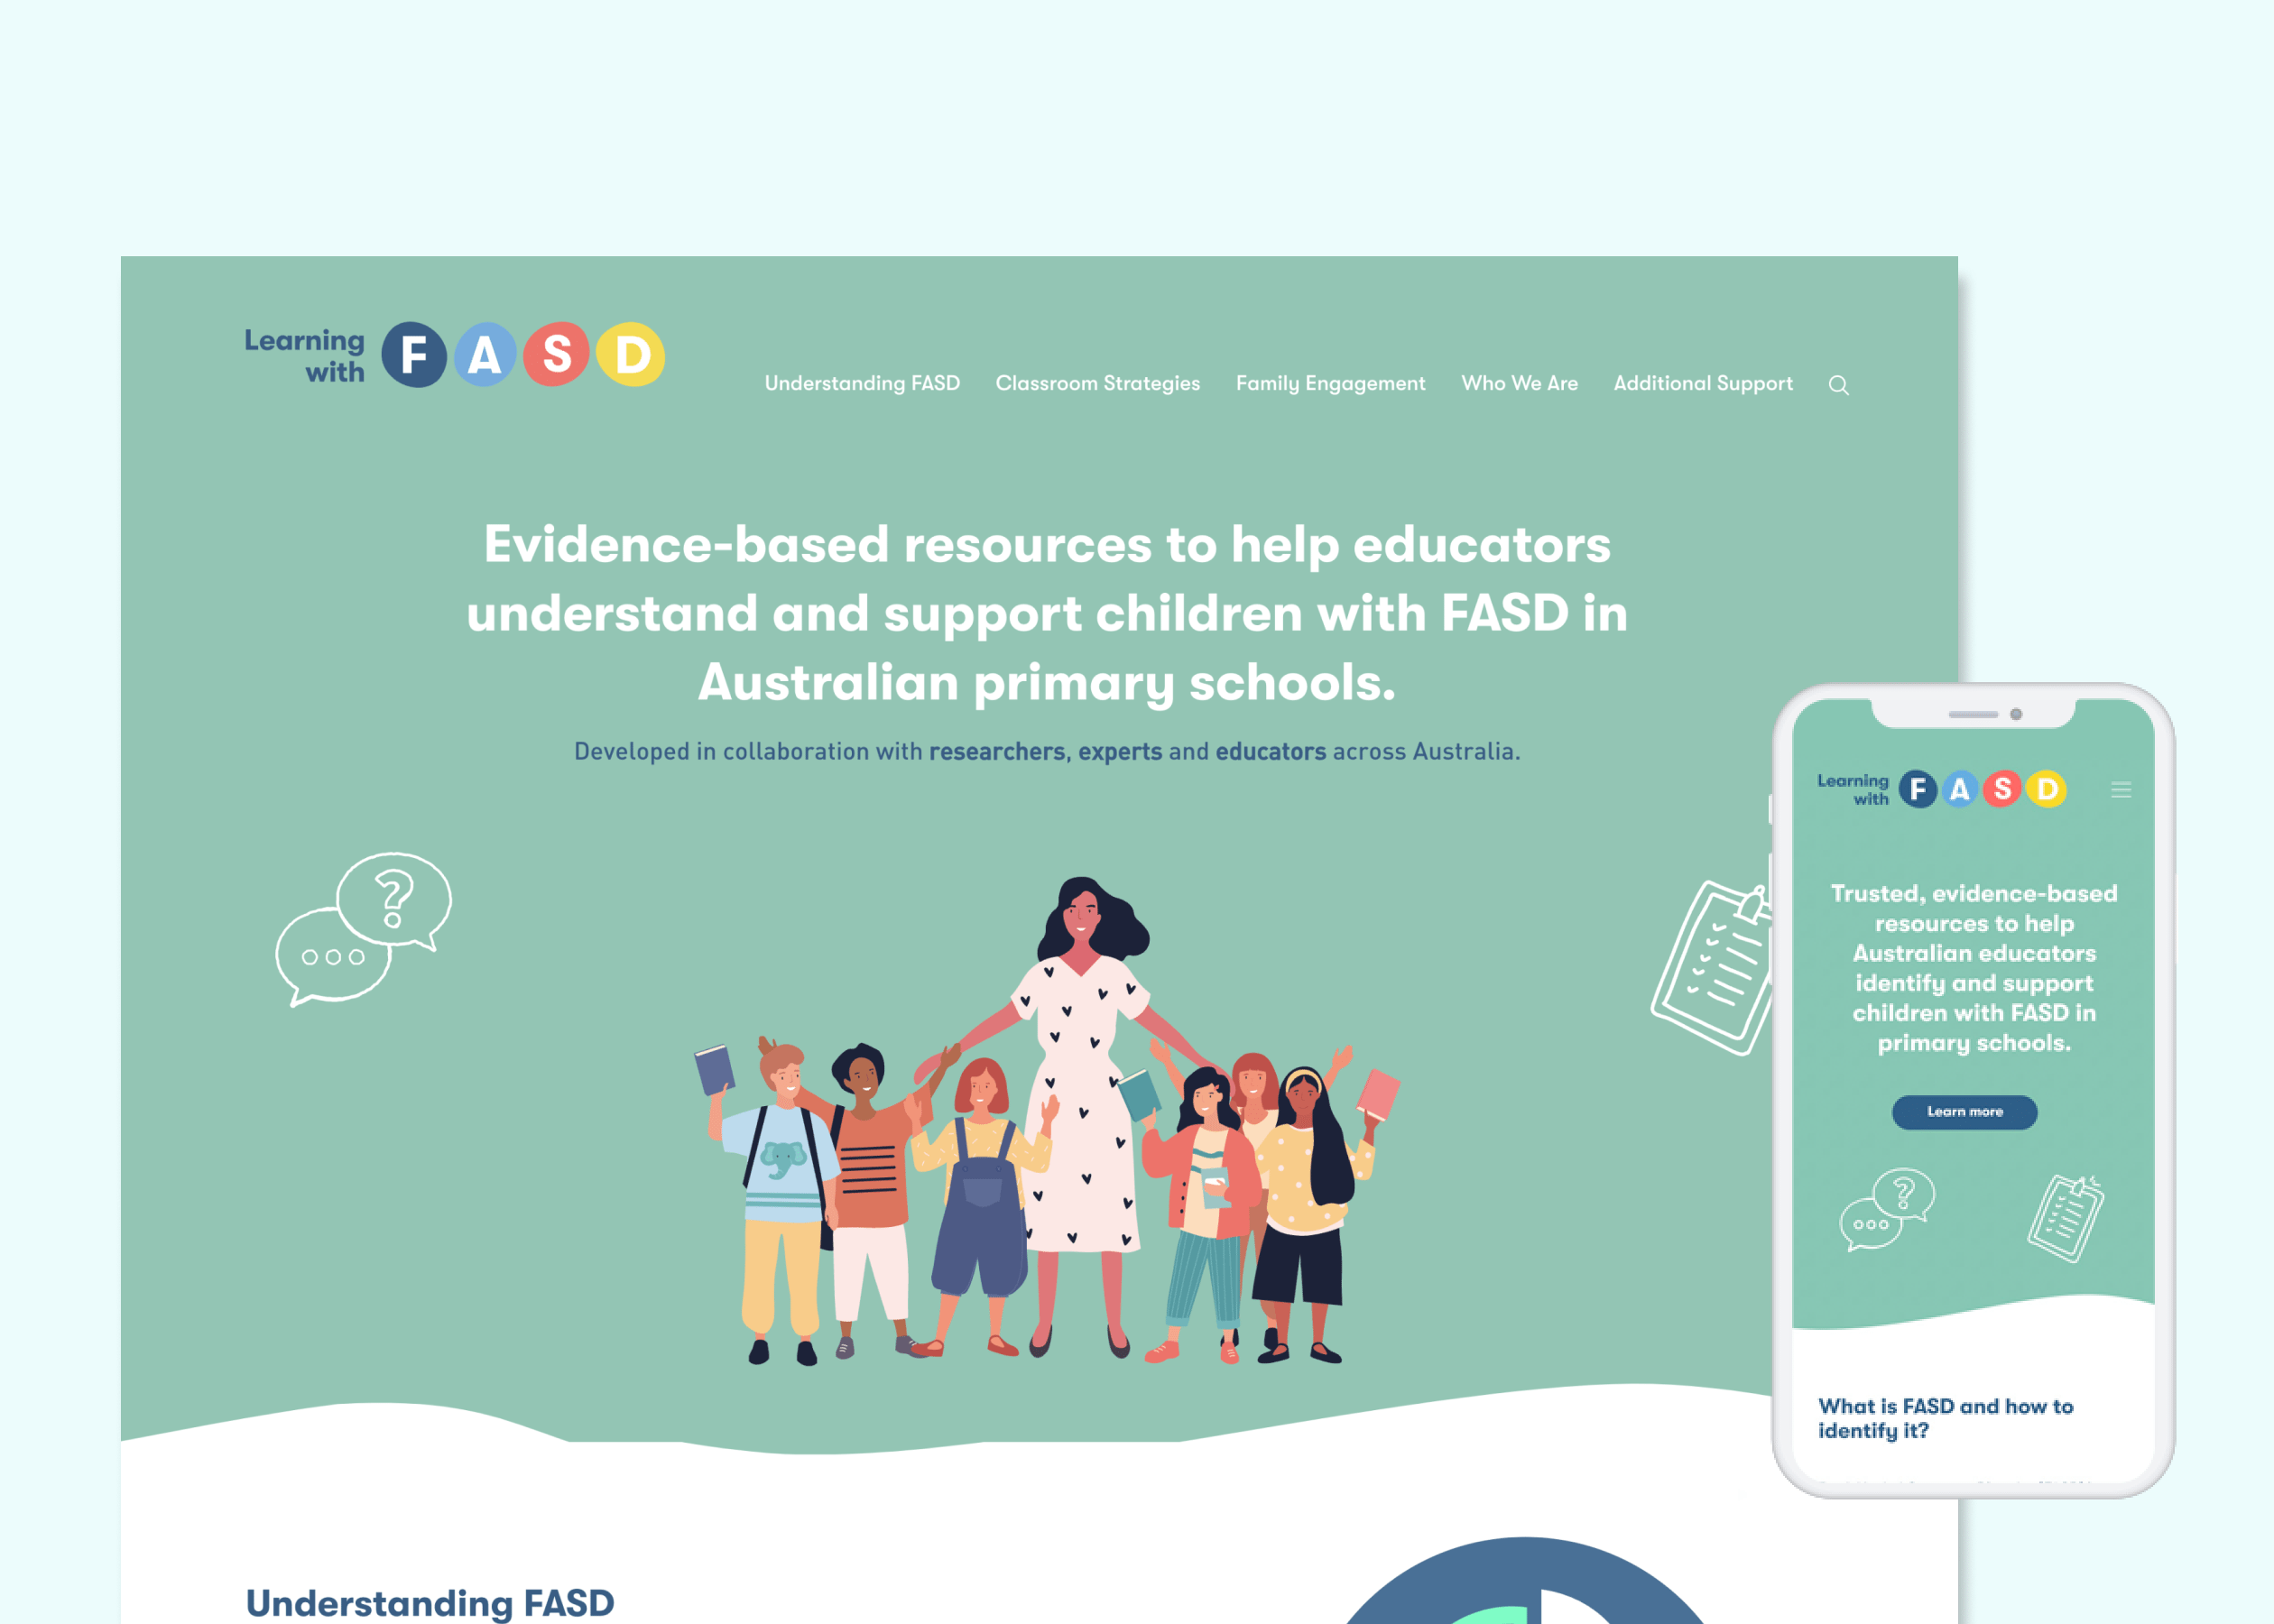 Image is of a screenshot of the Learning with FASD website